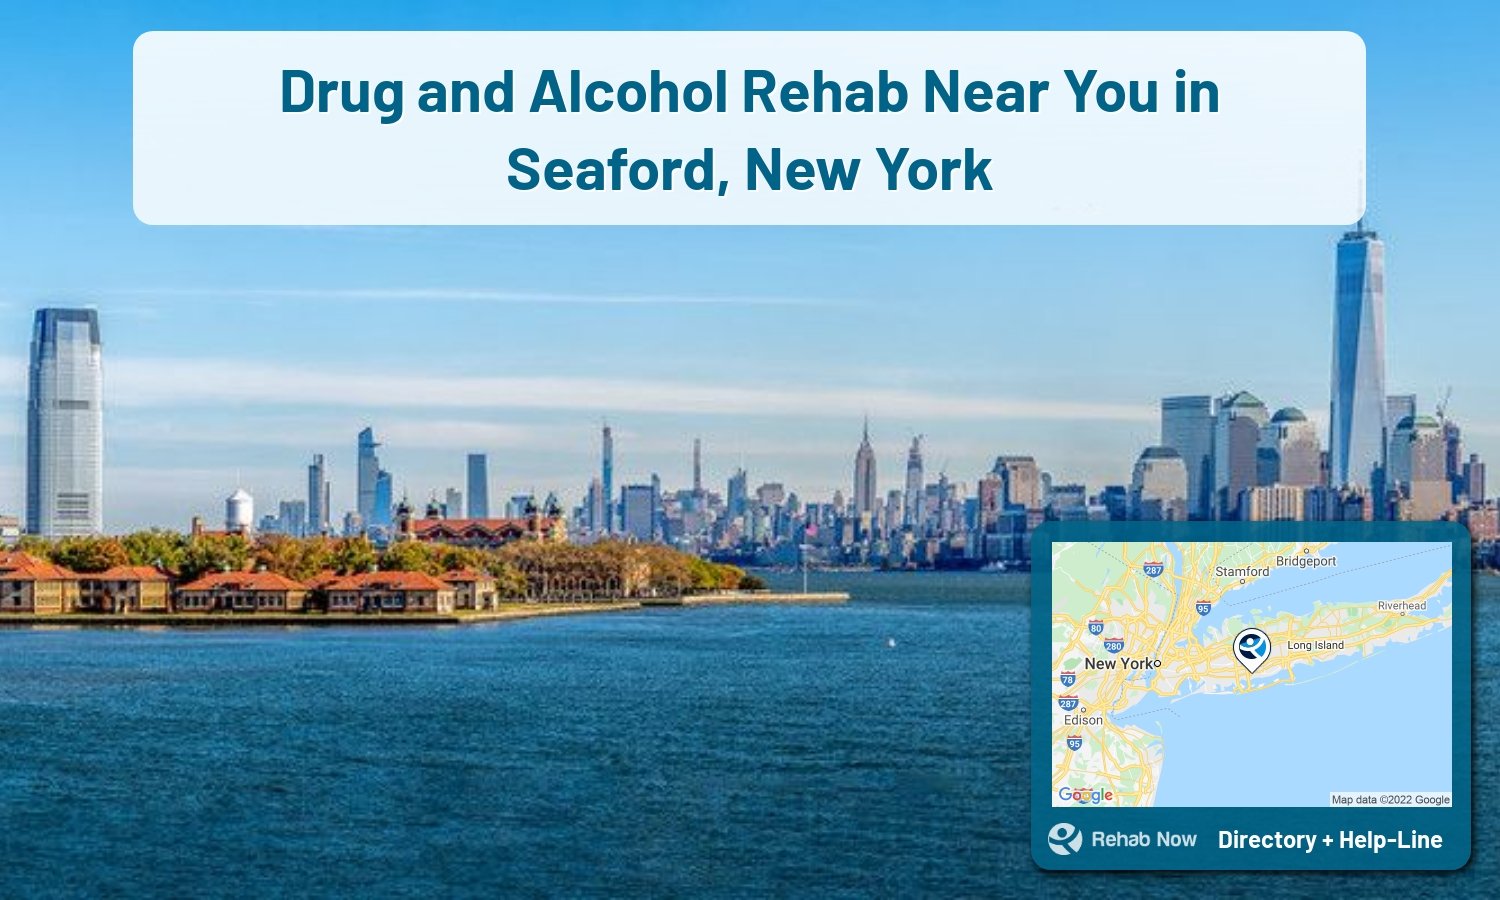 List of alcohol and drug treatment centers near you in Seaford, New York. Research certifications, programs, methods, pricing, and more.